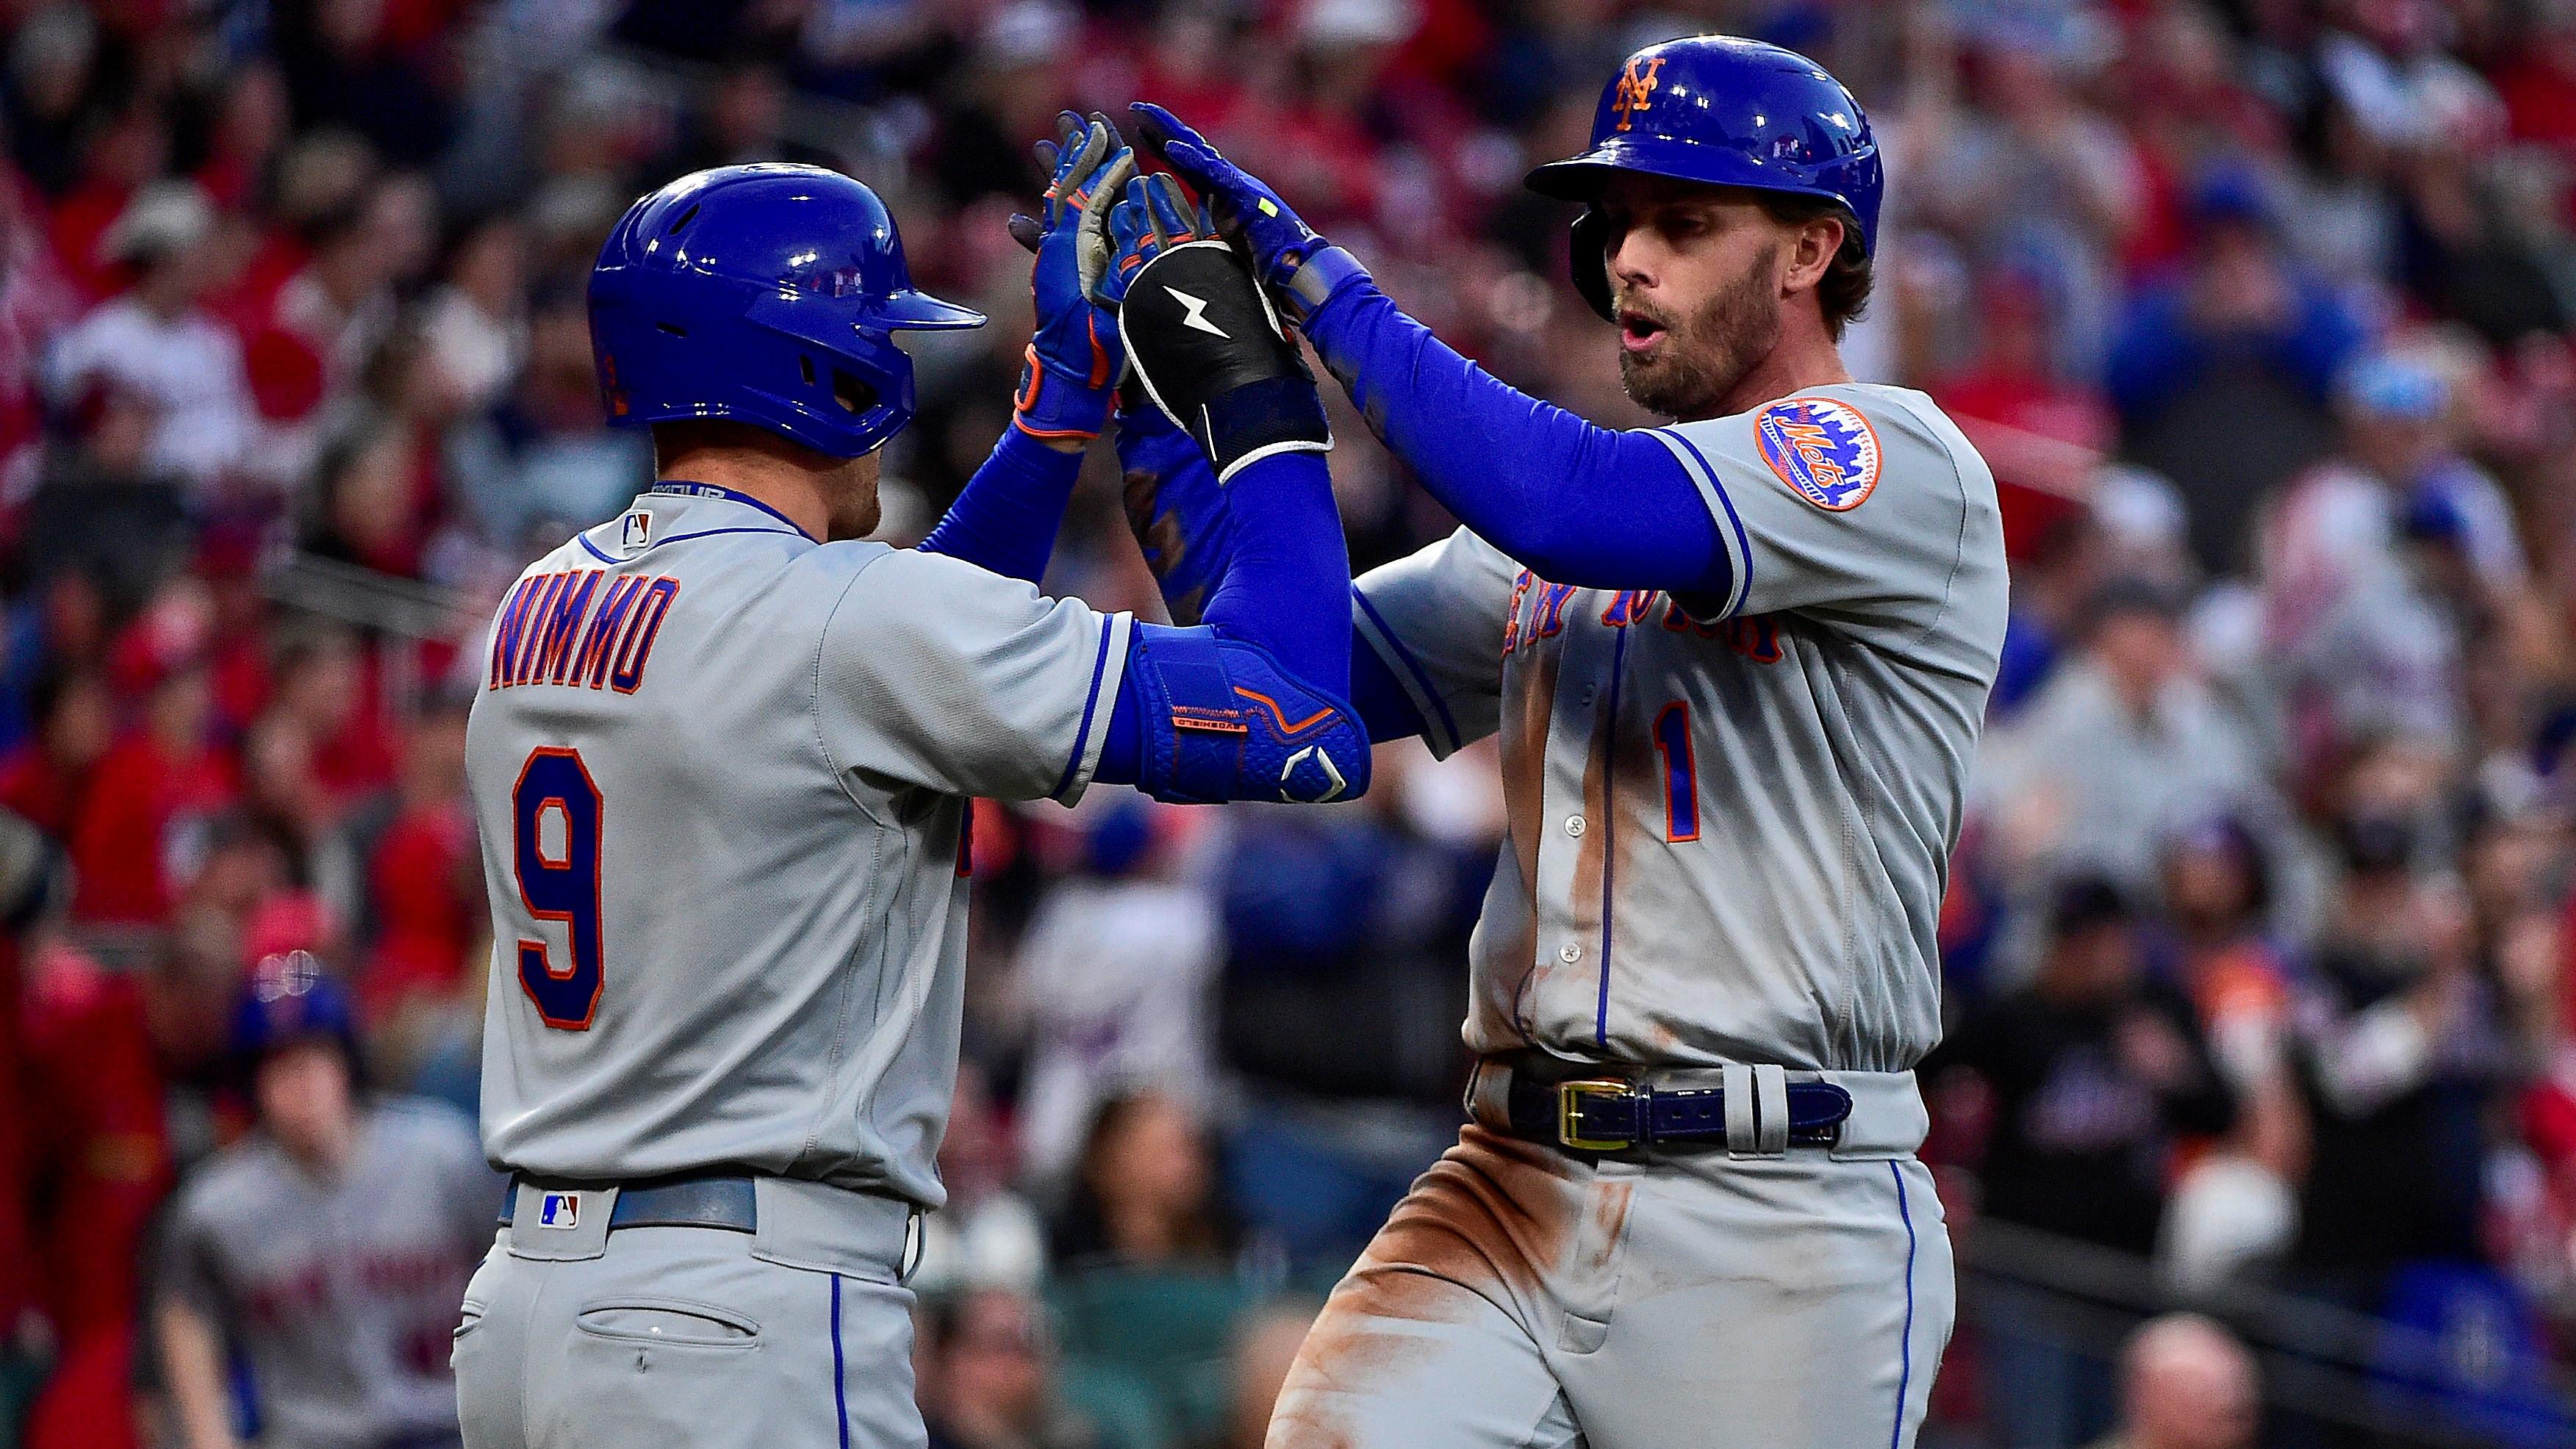 Apr 26, 2022; St. Louis, Missouri, USA; New York Mets second baseman Jeff McNeil (1) celebrates with center fielder Brandon Nimmo (9) after scoring against the St. Louis Cardinals during the third inning at Busch Stadium. / Jeff Curry-USA TODAY Sports